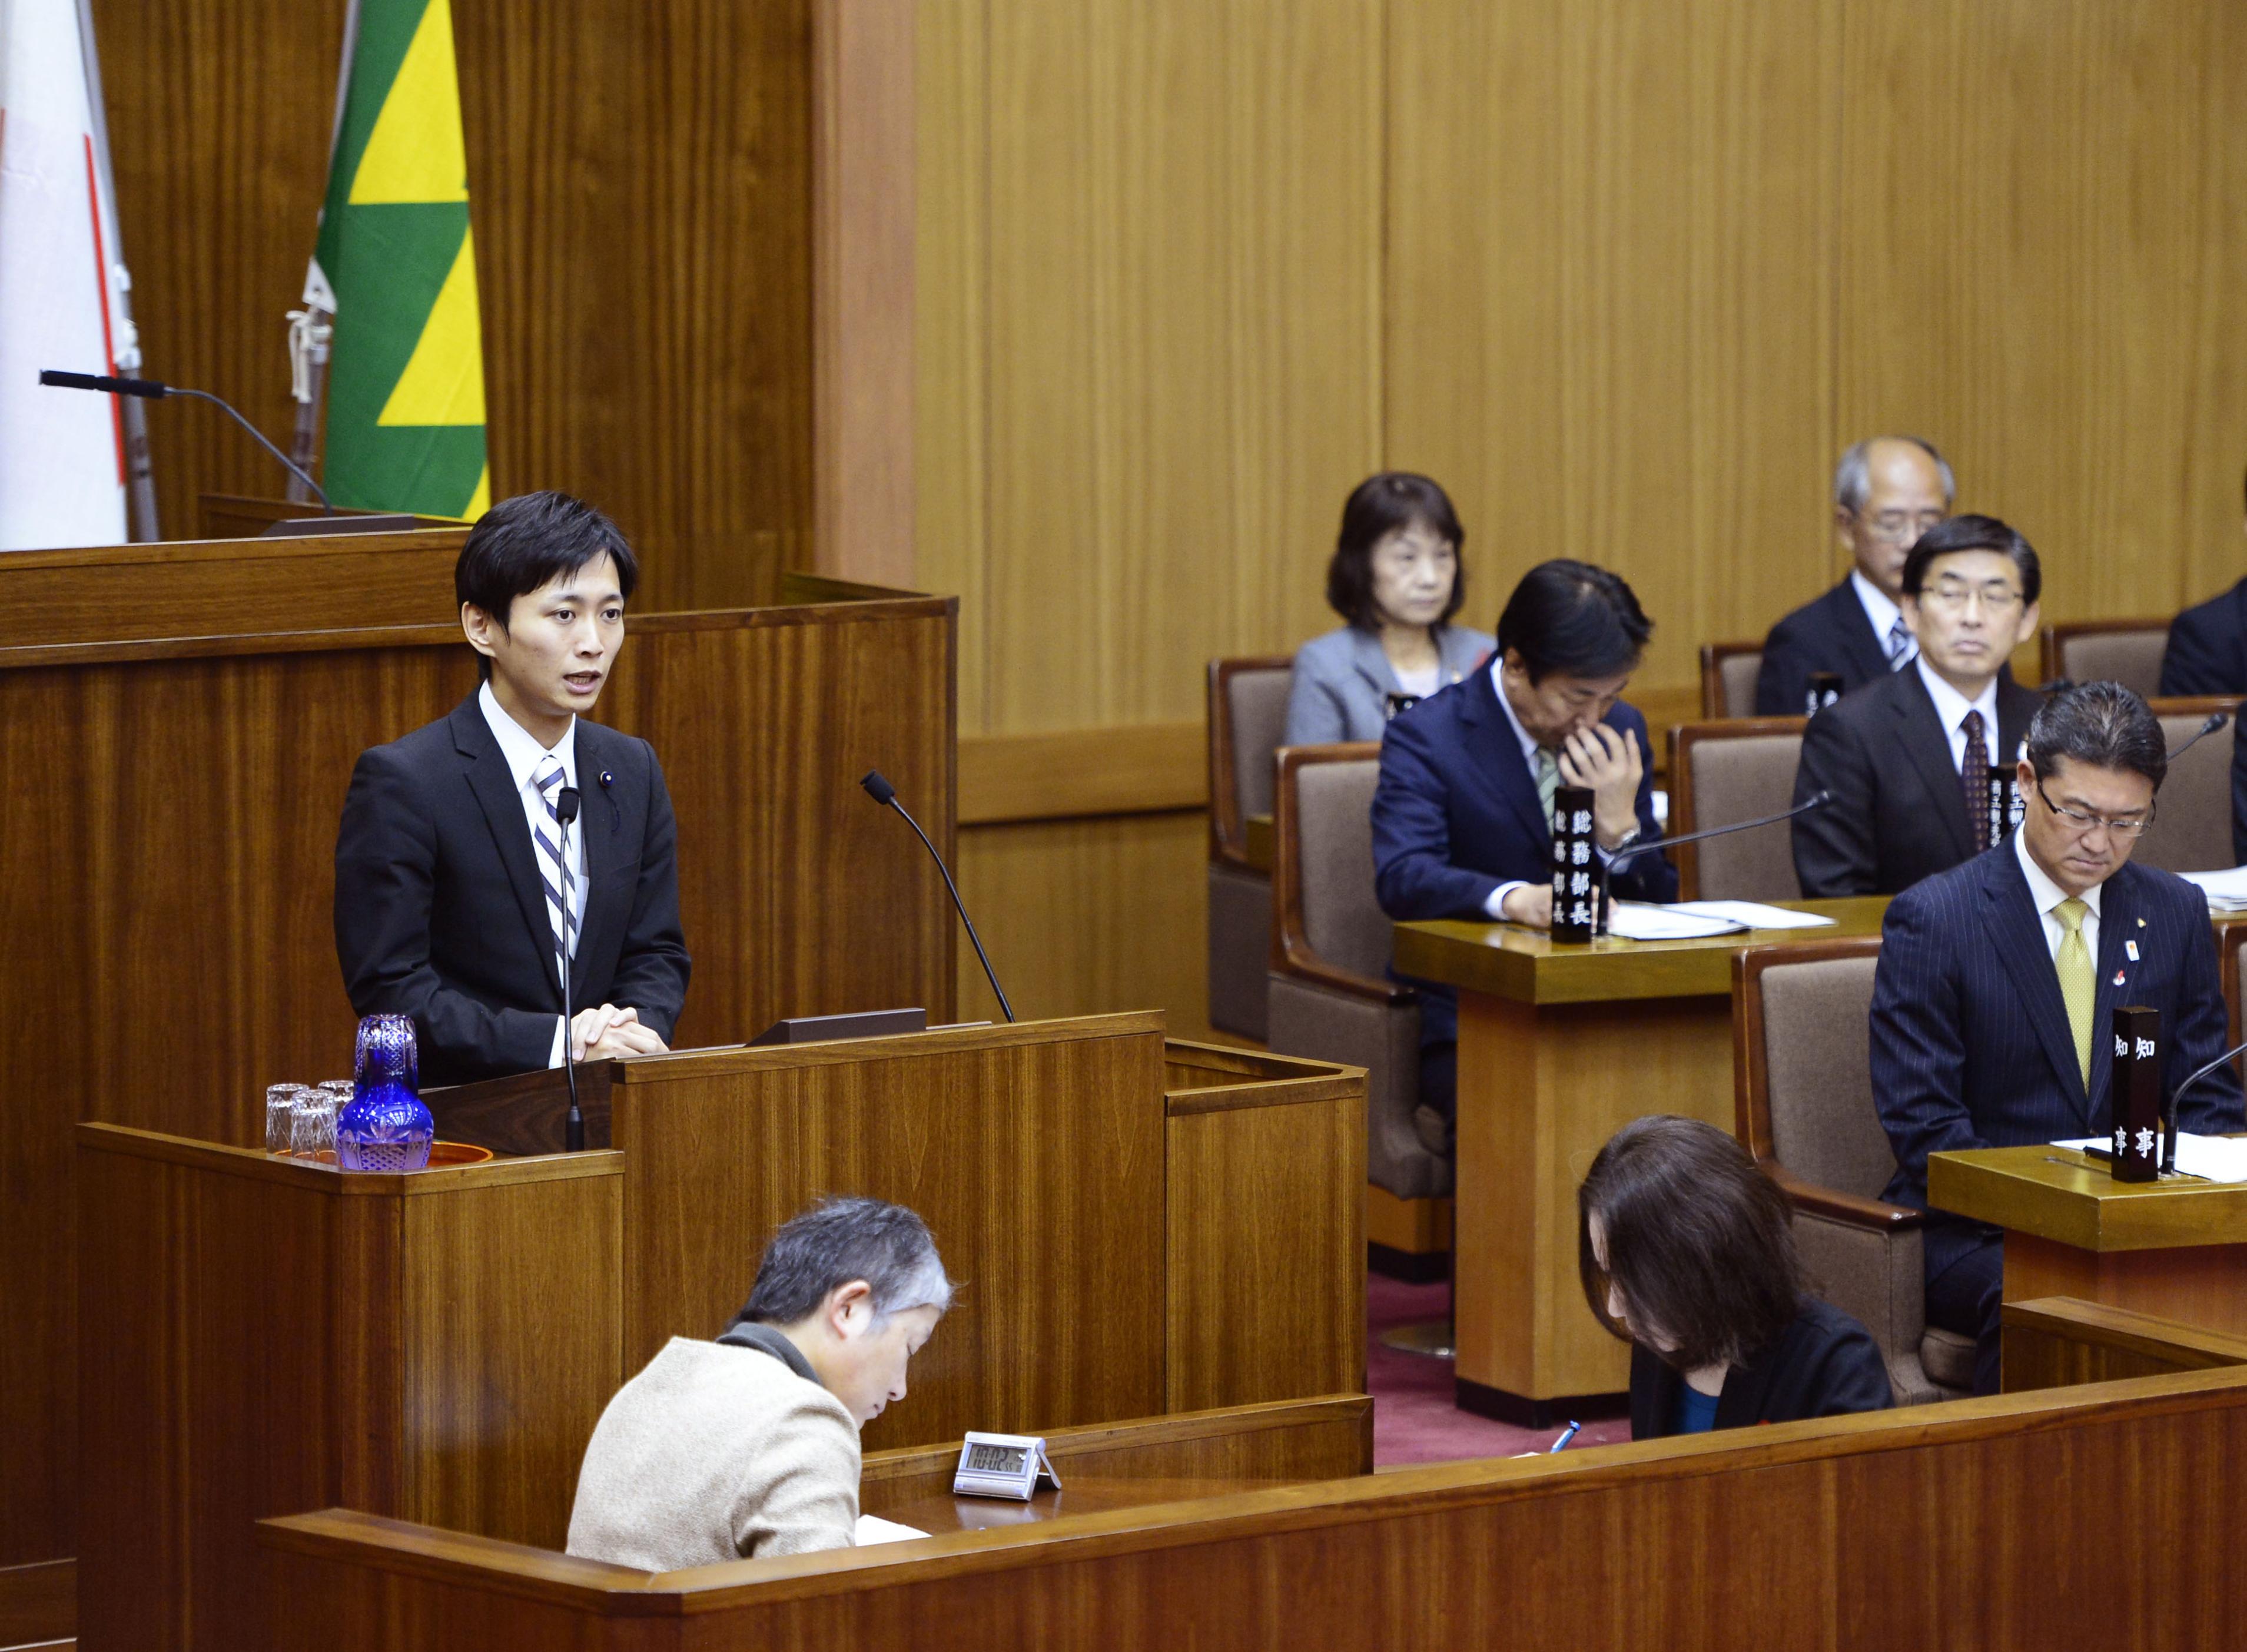 Tomonori Kiyoyama asks questions during a plenary session of the Miyazaki Prefectural Assembly in November. | KYODO